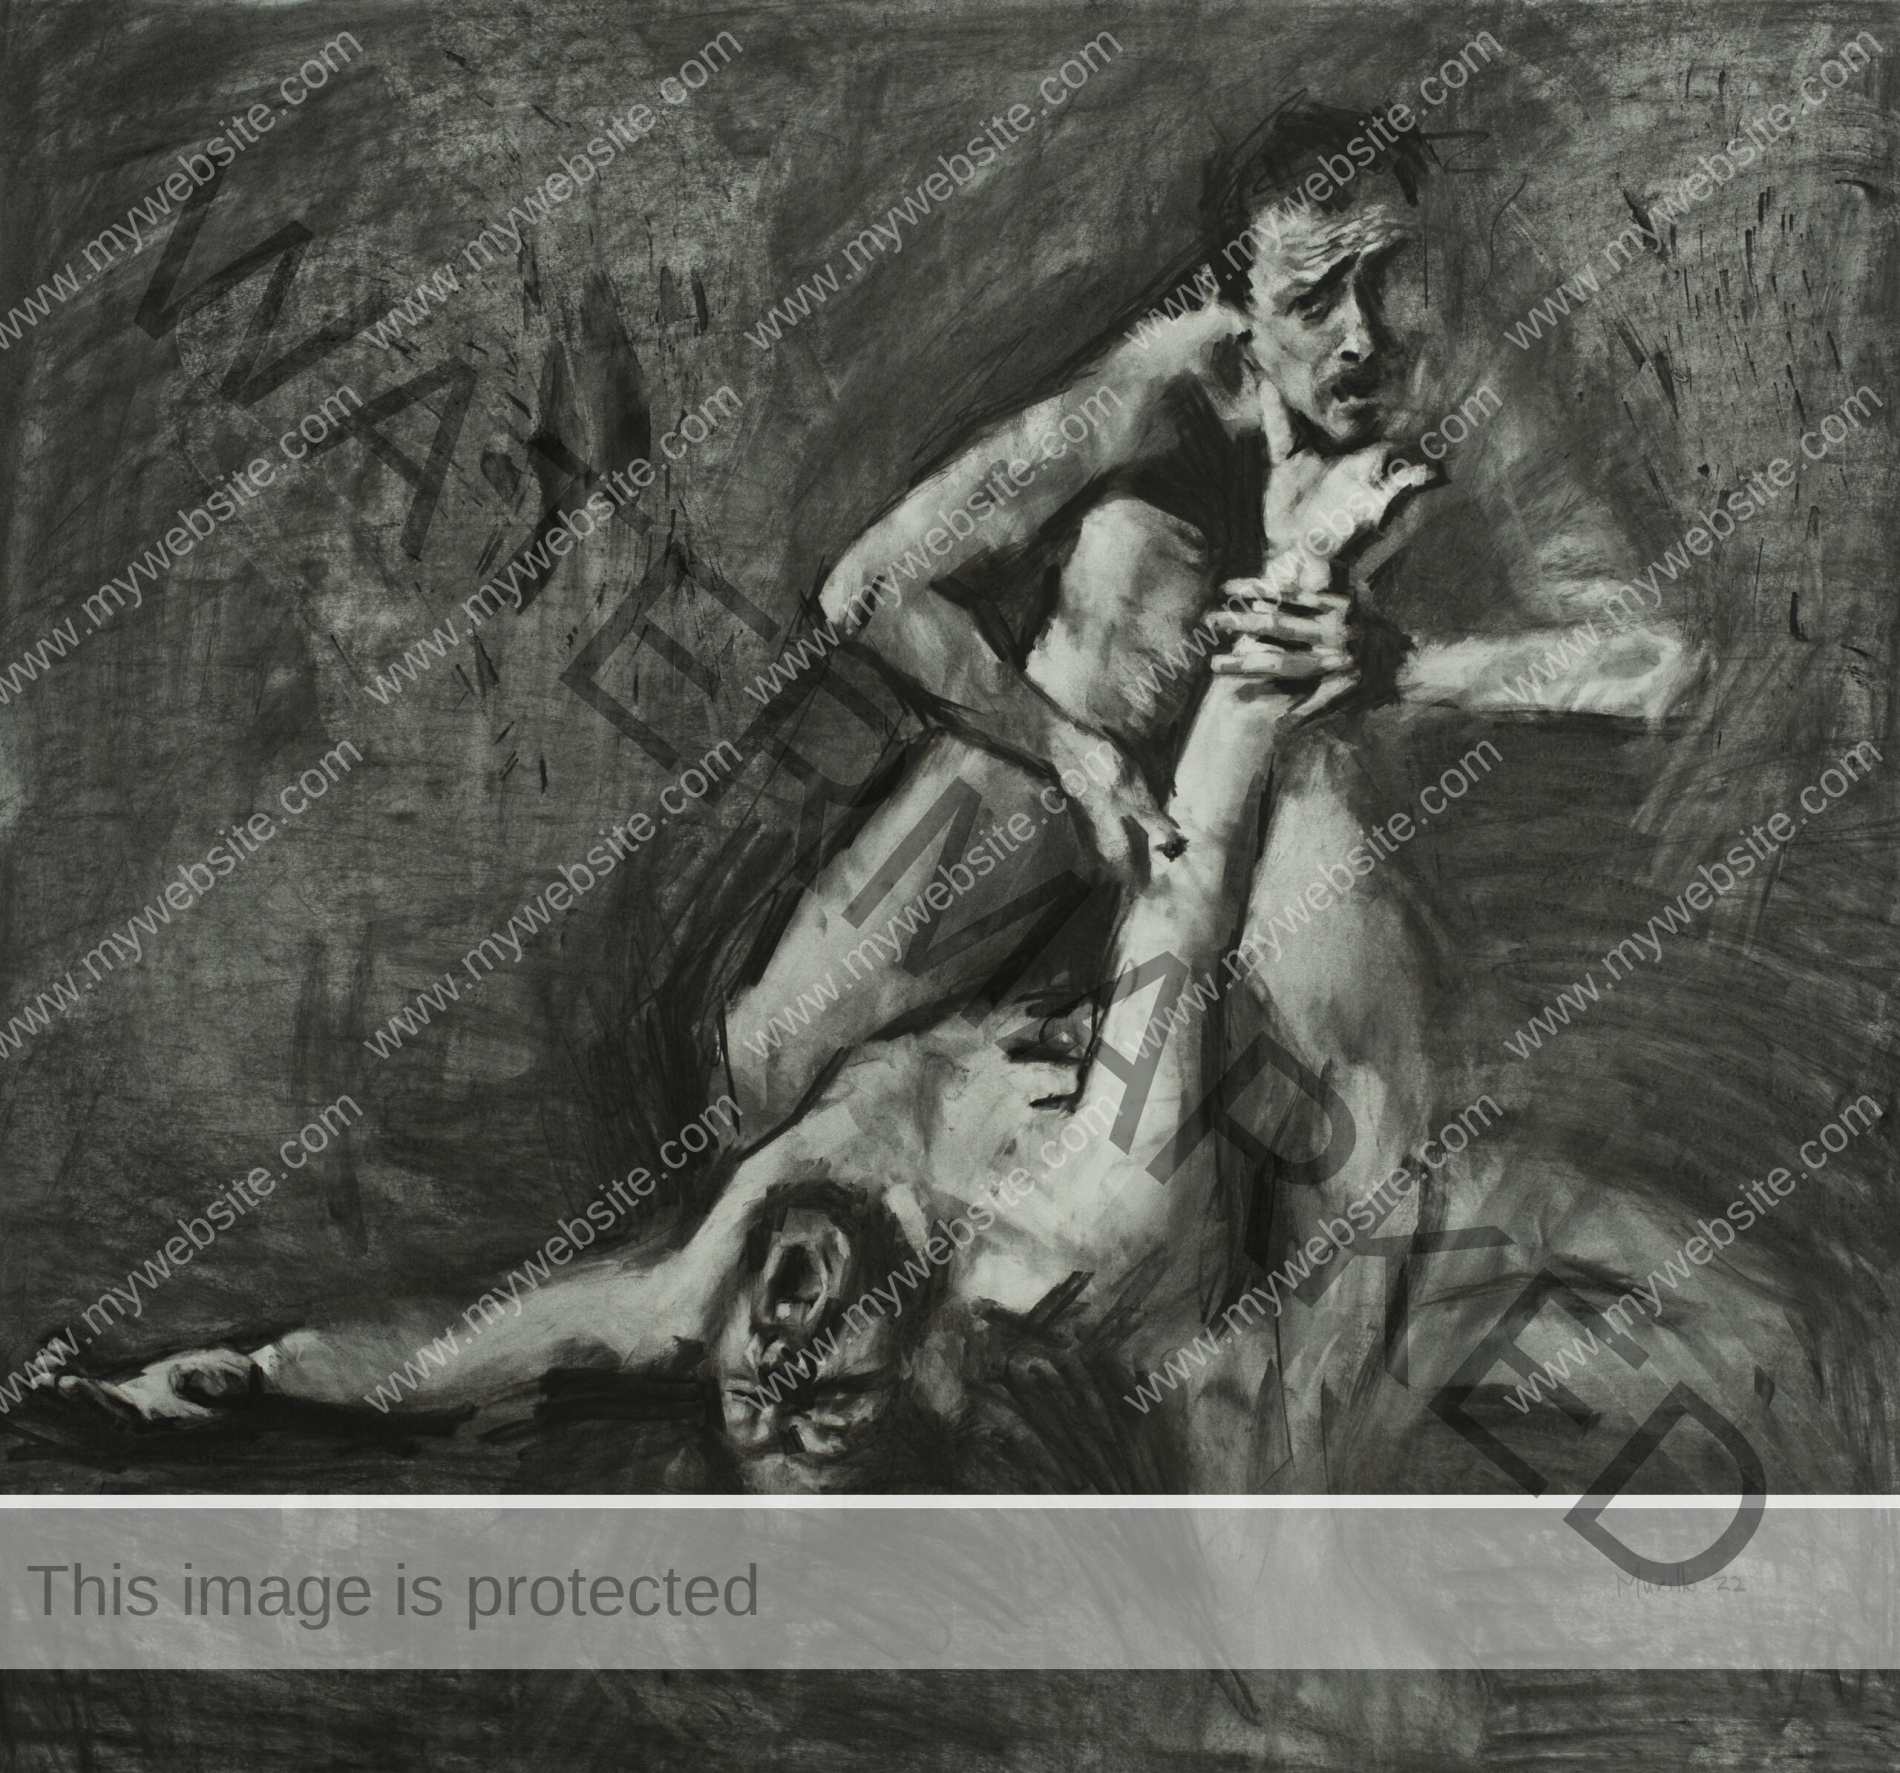 Charcoal drawing from Roberto Murillo's figurative Couplings series, featuring two nude men tussling away. Energetic charcoal drawing.